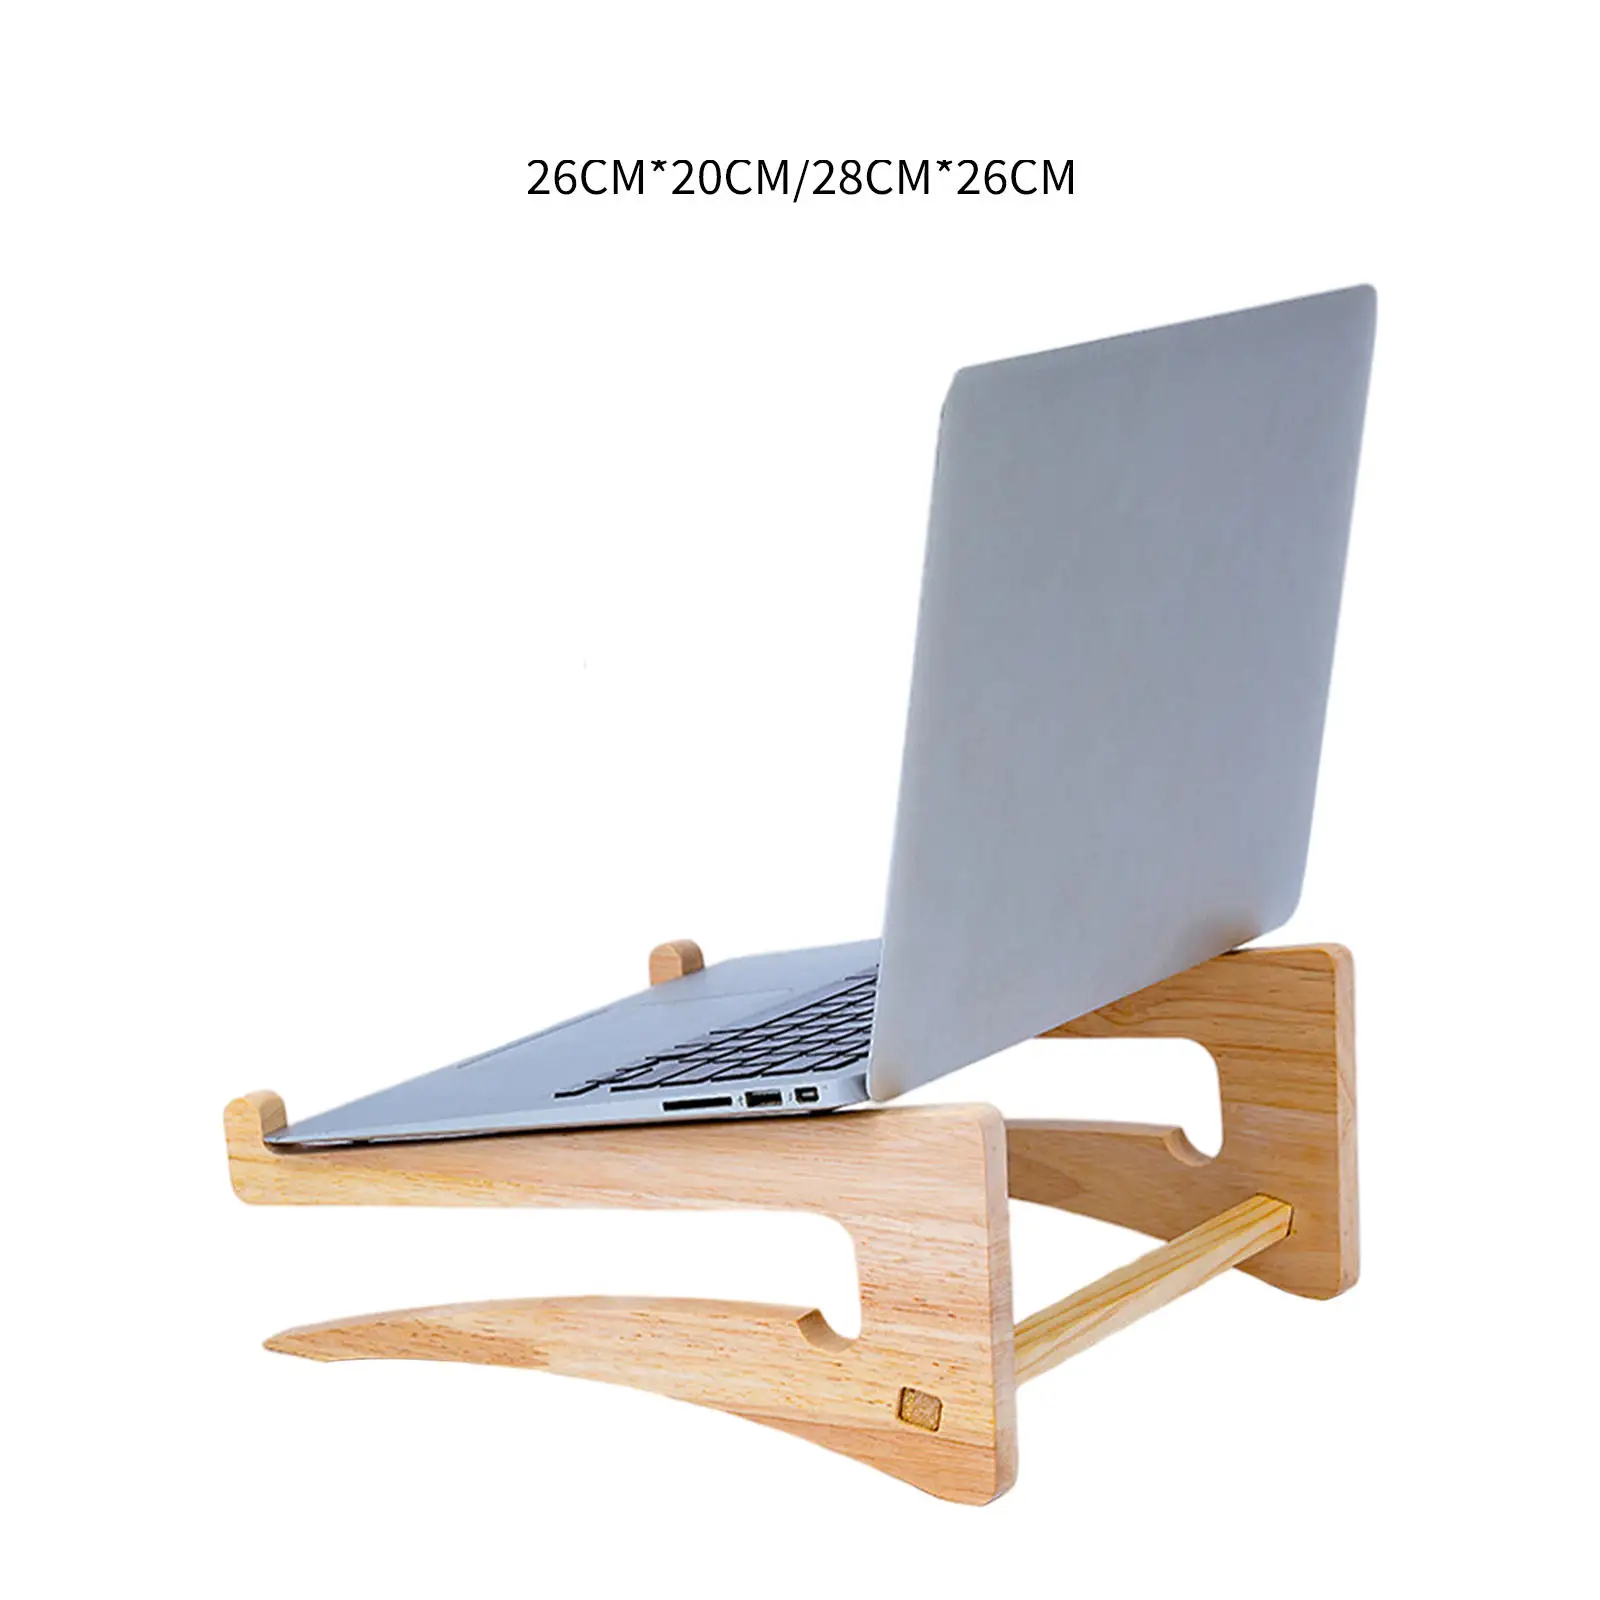 Laptop Stand Lifting Office Supplies Solid Wood Cooling Holder Computer Bracket for All Laptops Desktop Student White Collar